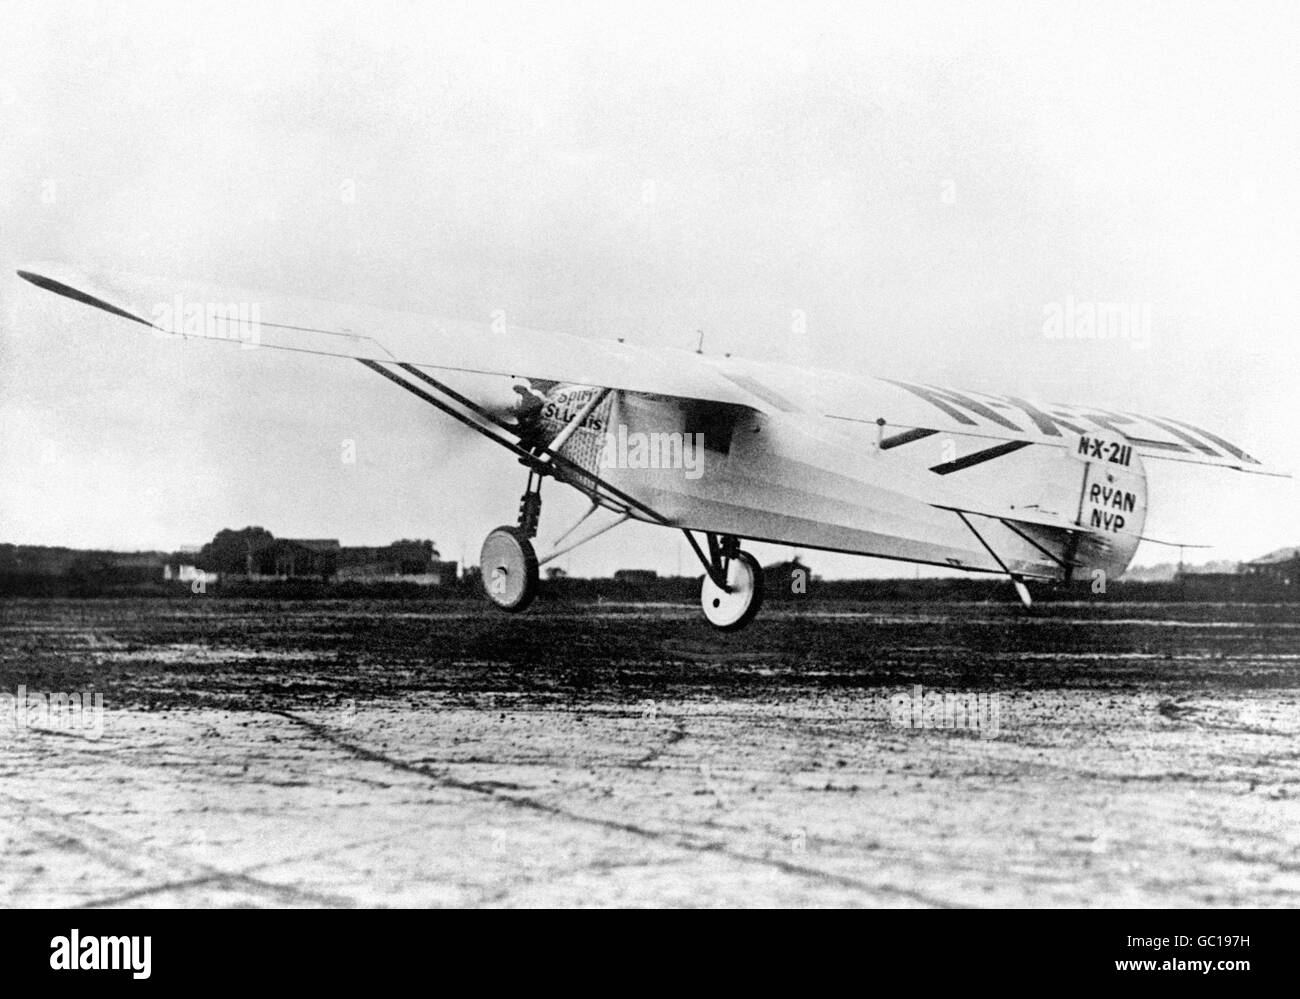 Captain Charles Lindbergh taking off in the Spirit from Roosevelt Airfield, Garden City, New York. He landed 33 hours, 30 minutes later at Le Bourget Aerodrome in Paris, France to a hero's welcome. Stock Photo